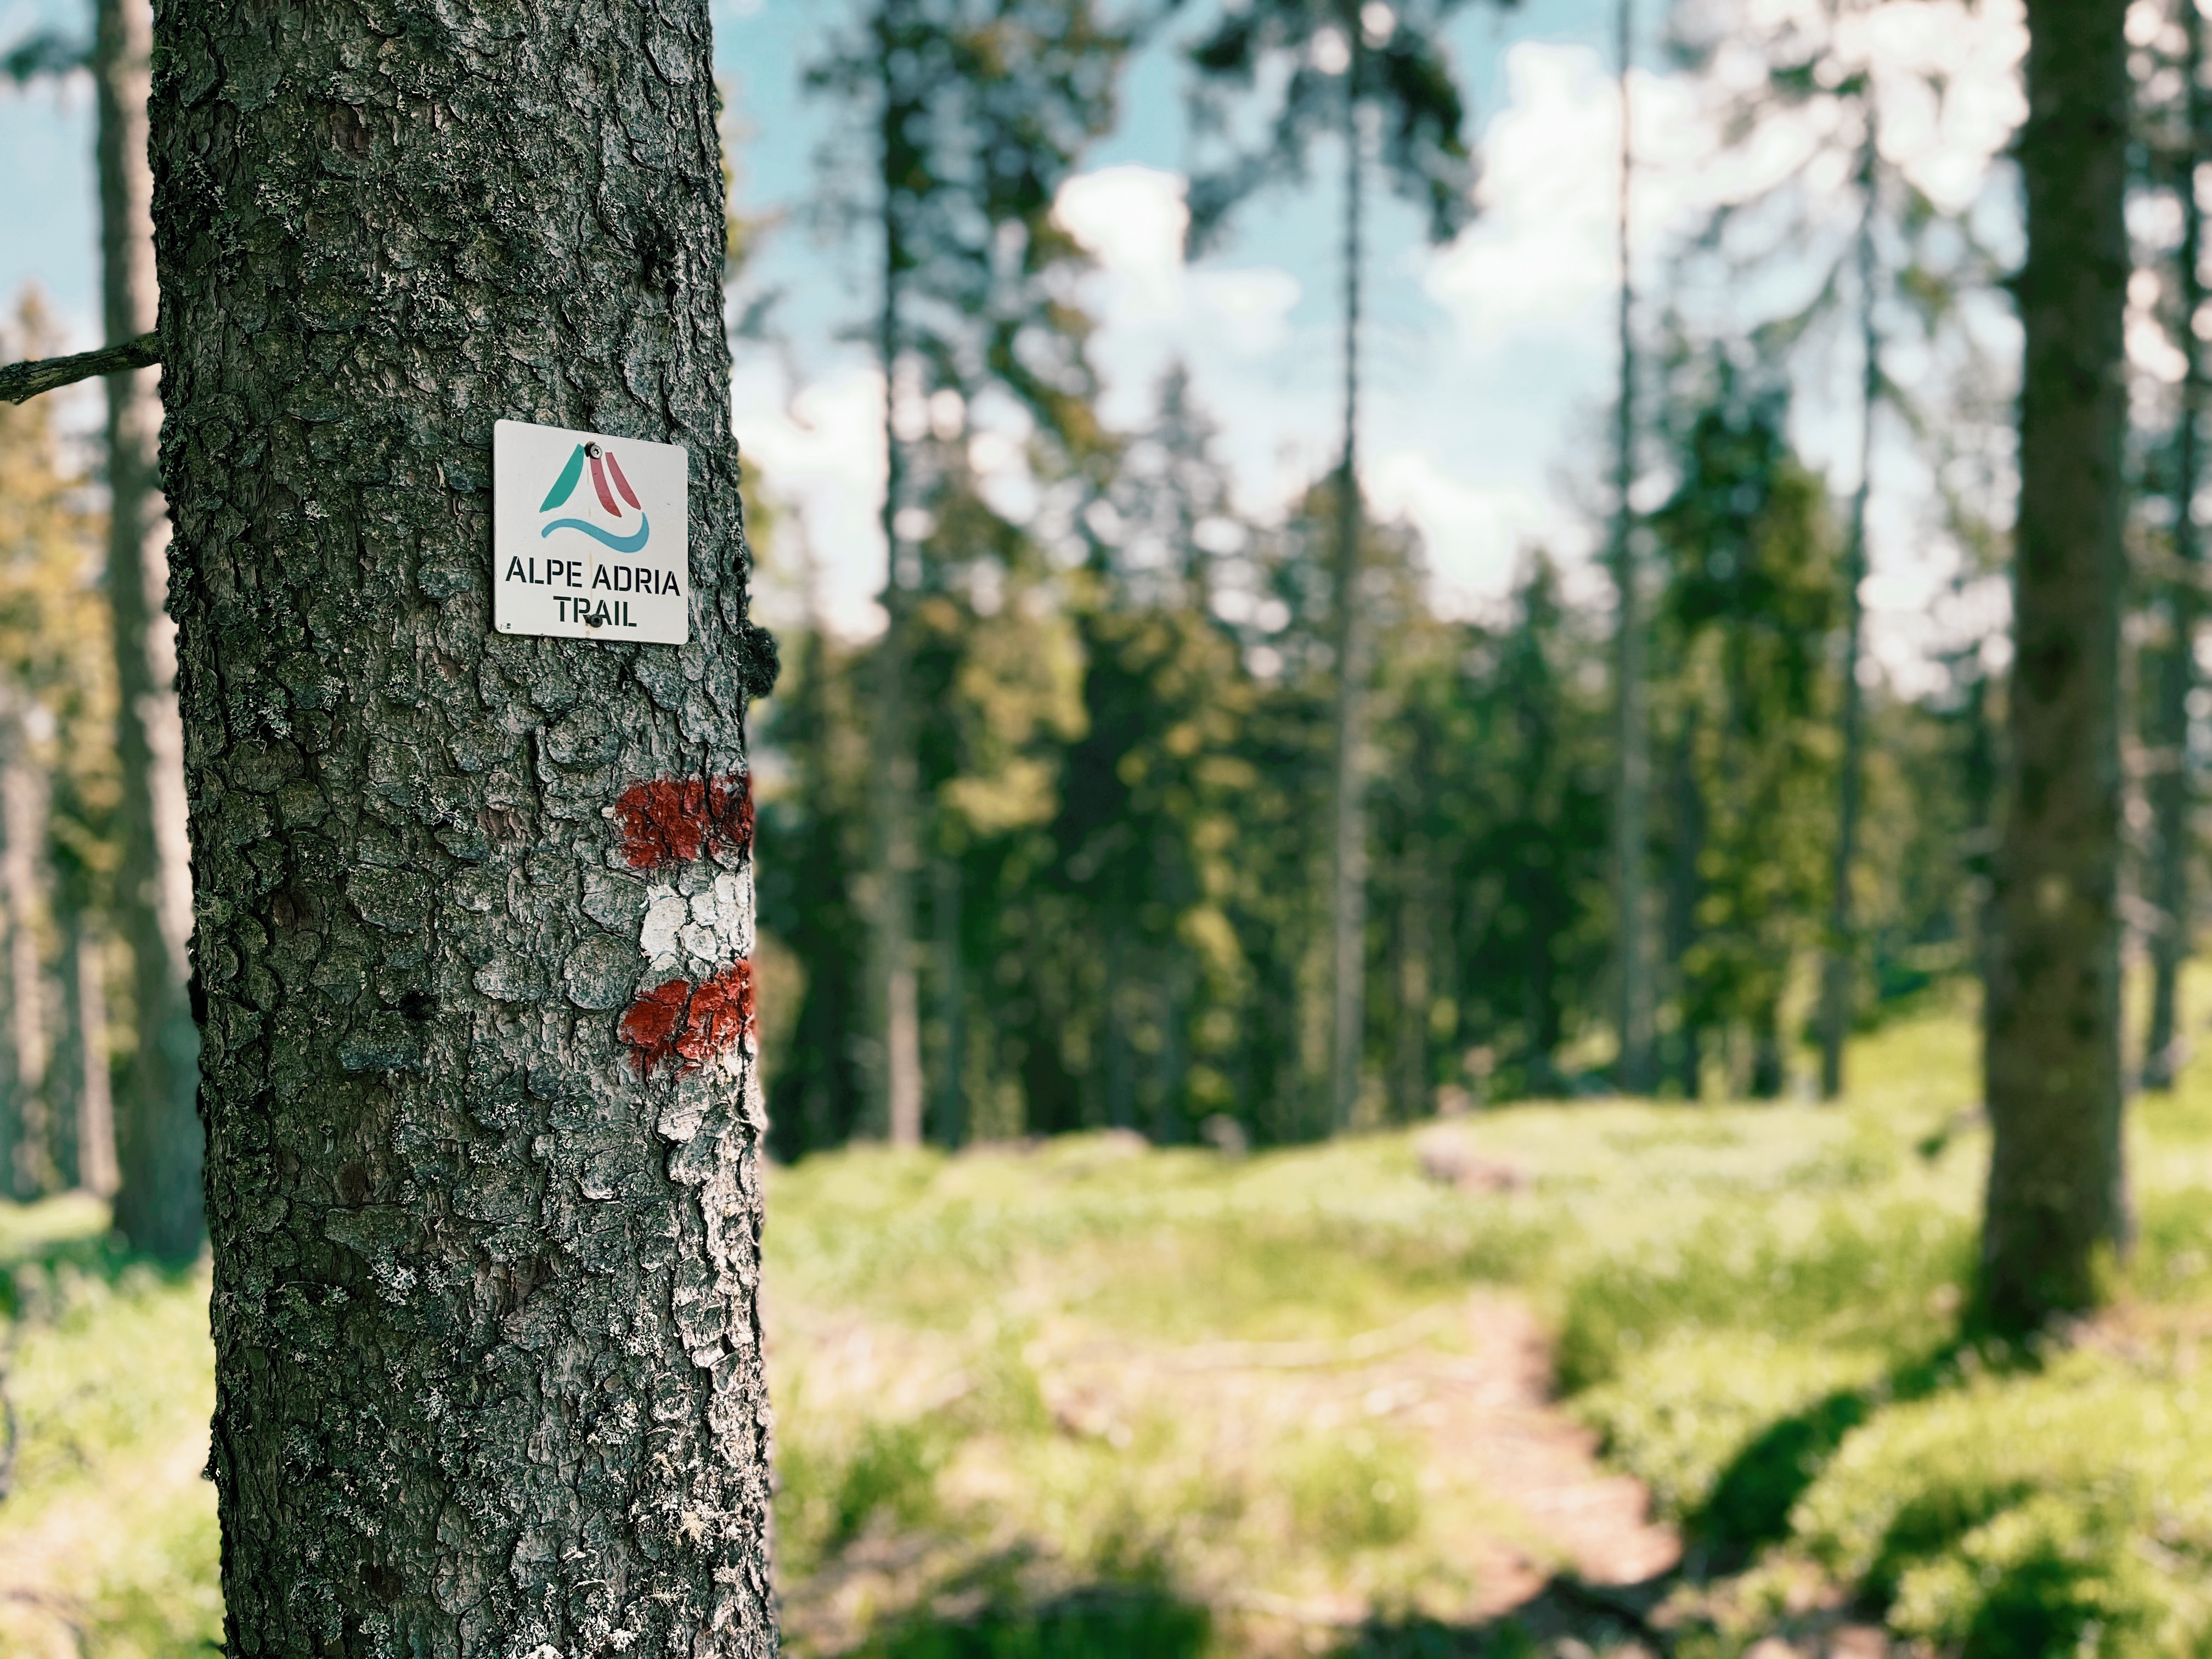 Road sign on tree in forest on the Alpe Adria Trail, a long-distance hiking trail in Europe